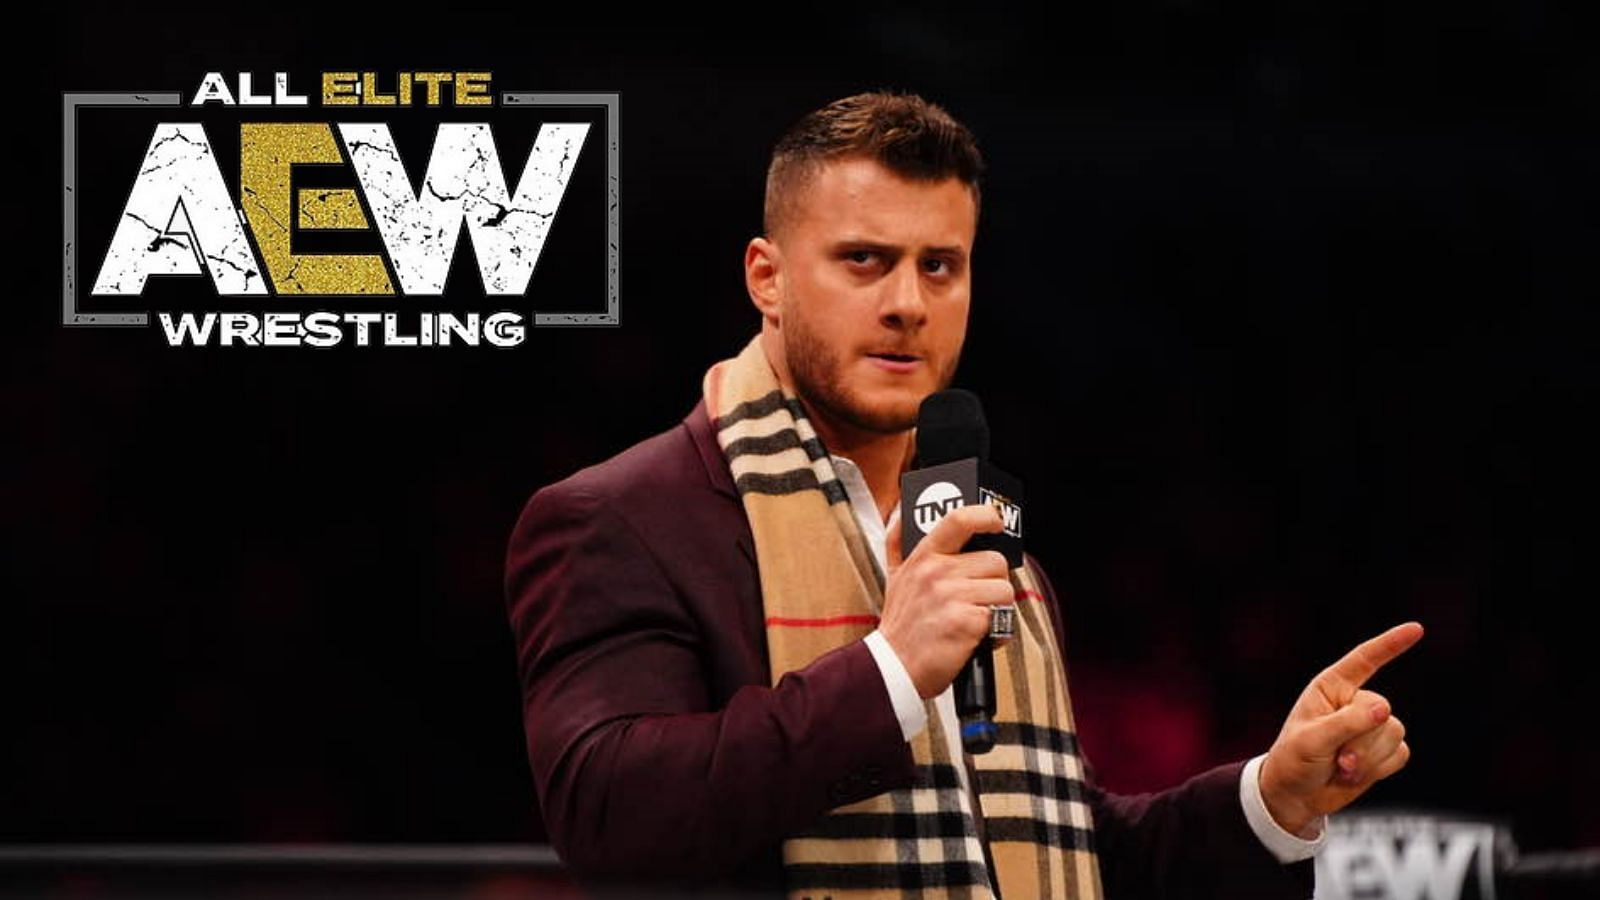 Will The Salt of the Earth ever return to AEW?